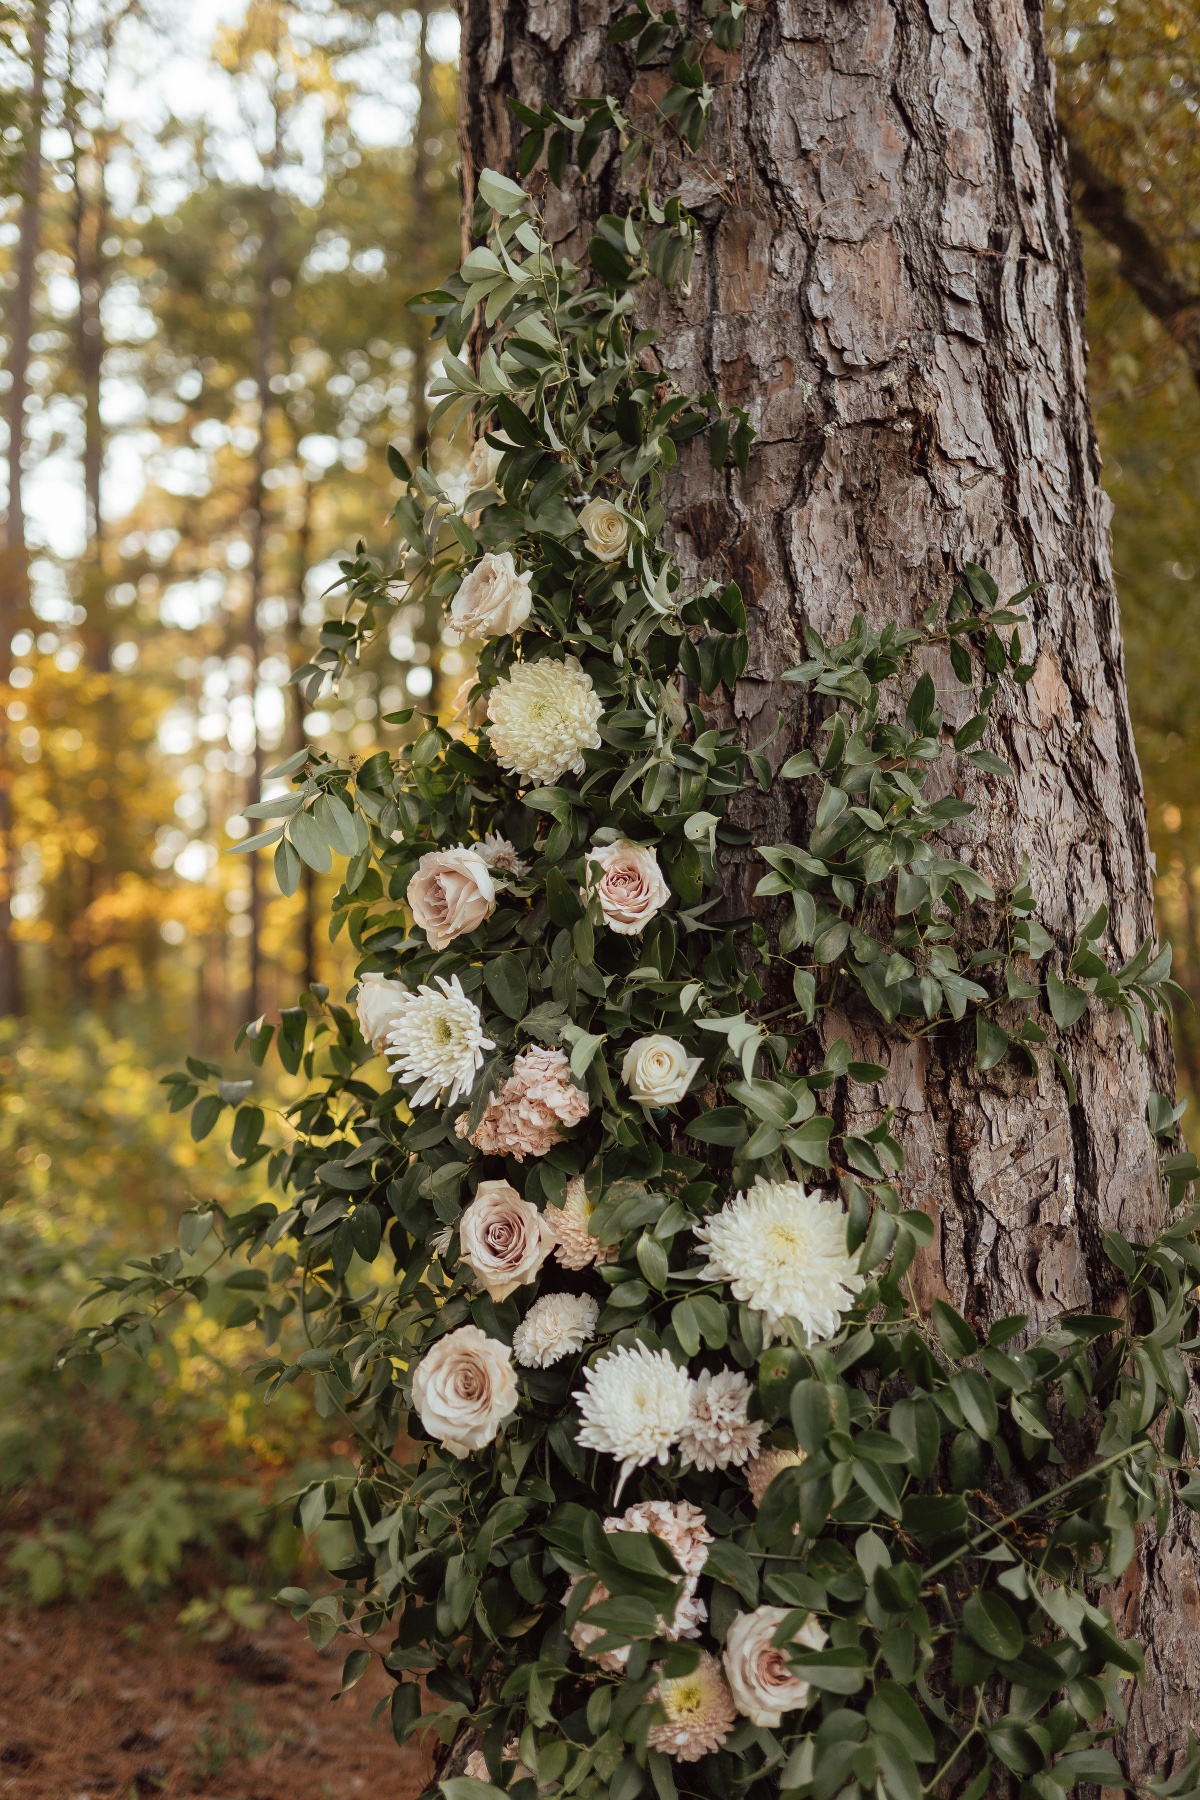 roses growing on trees